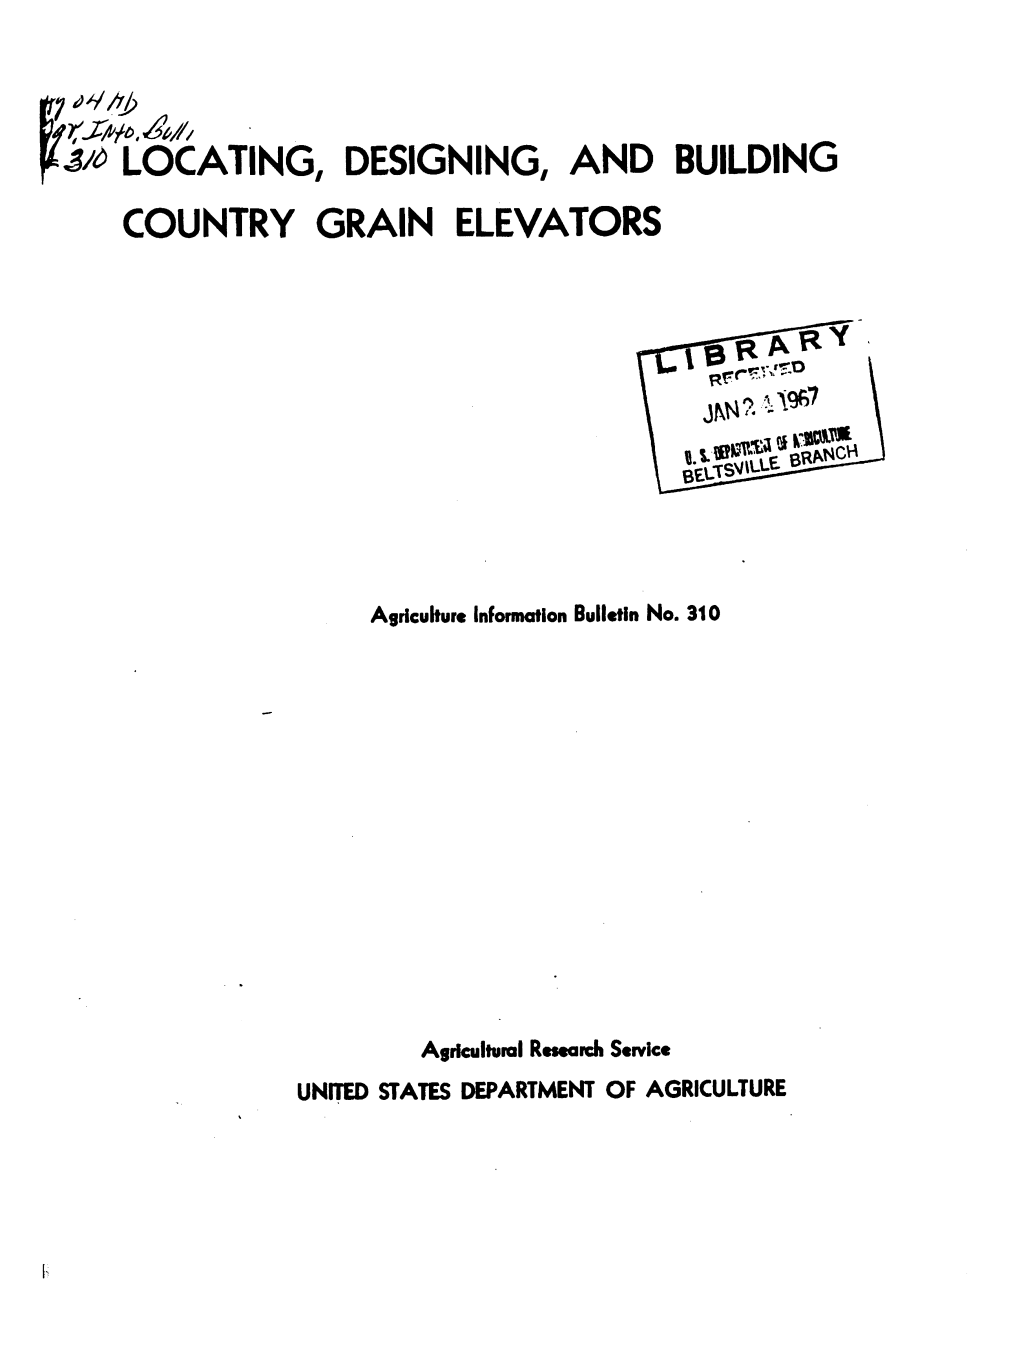 À Locating, Designing, and Building Country Grain Elevators